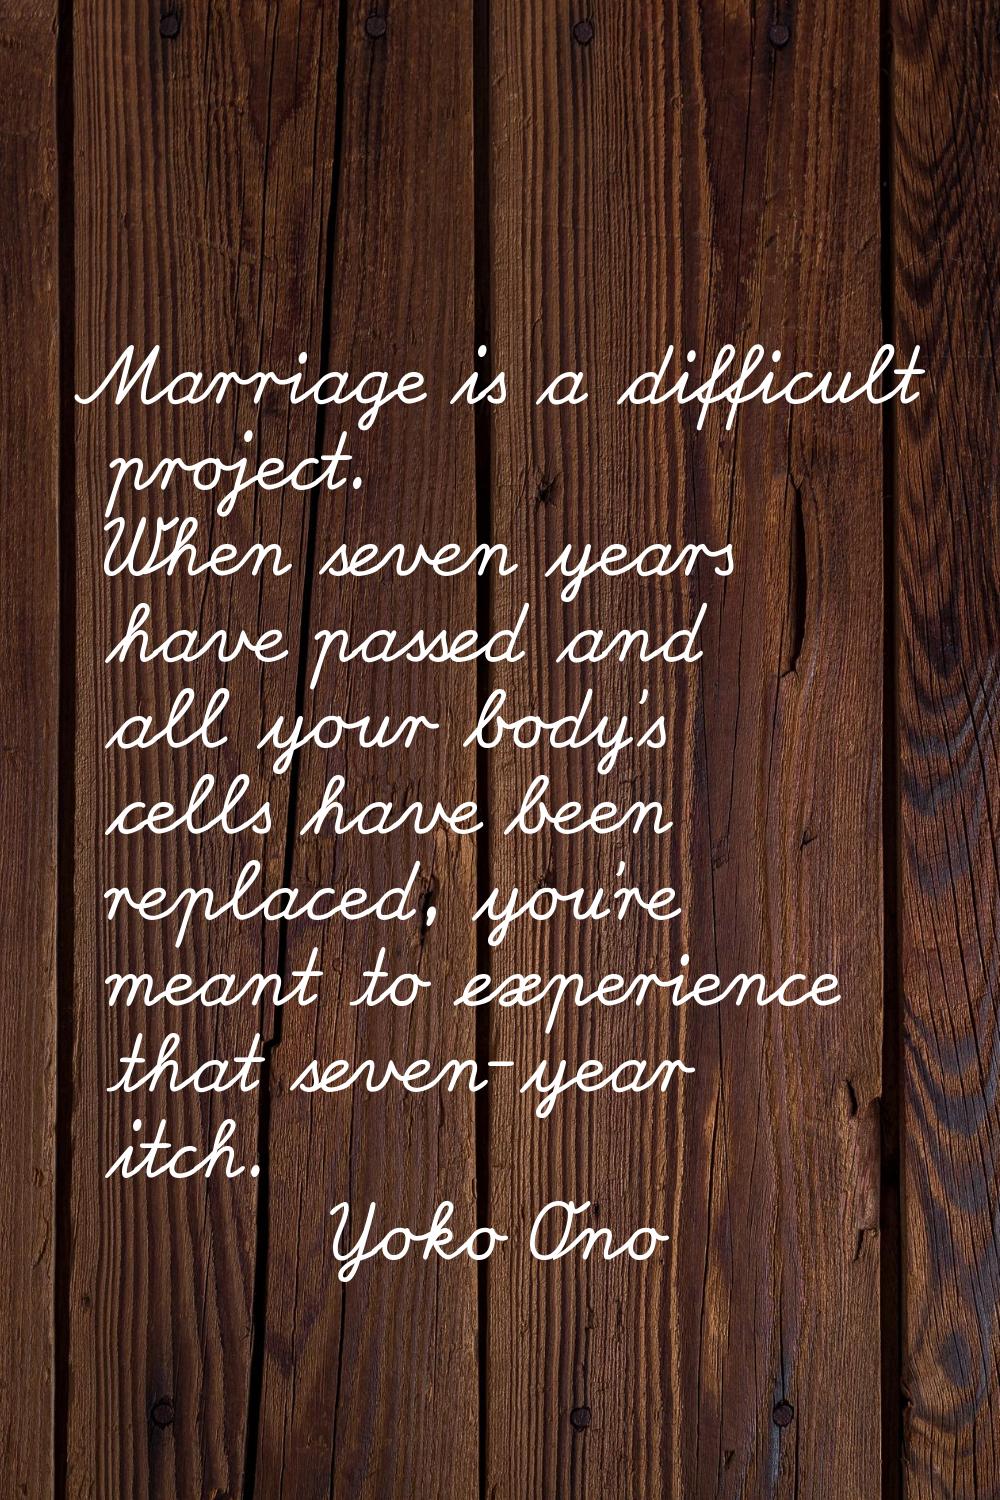 Marriage is a difficult project. When seven years have passed and all your body's cells have been r